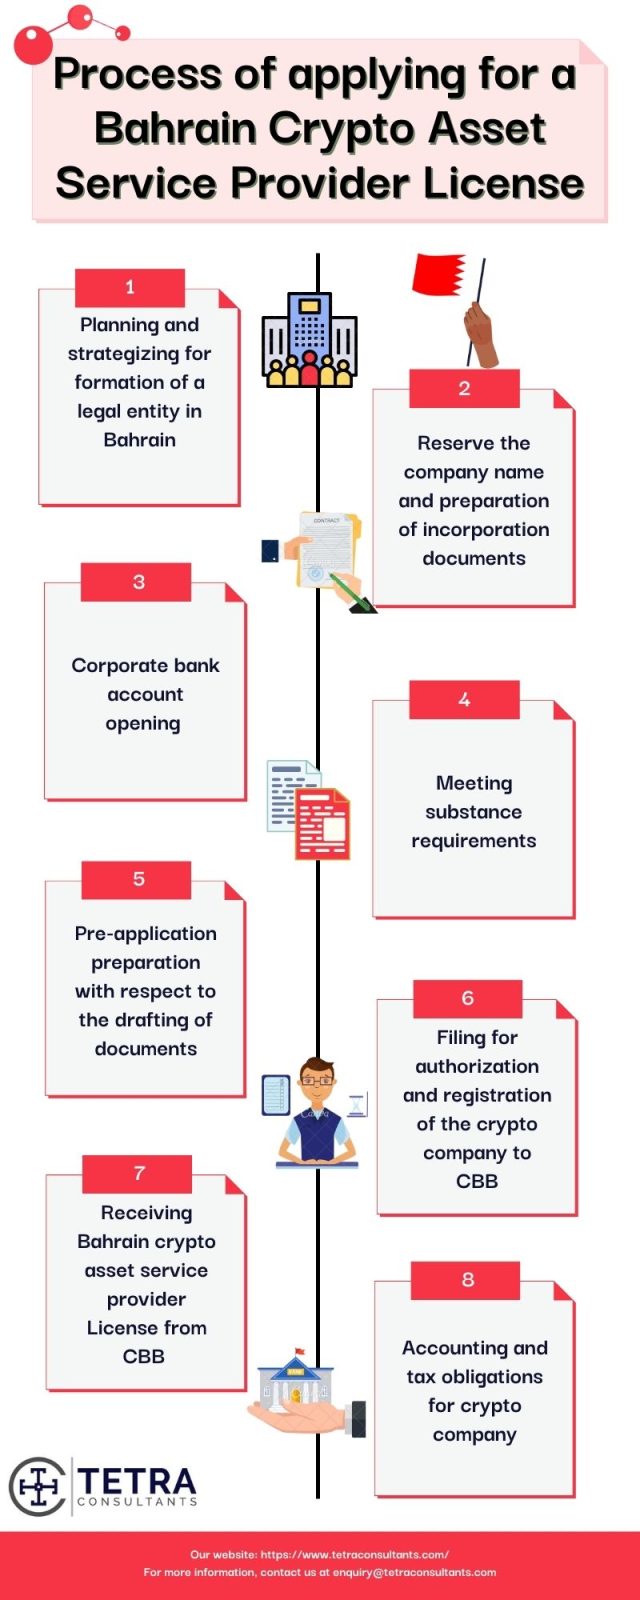 Process of applying for a Bahrain Crypto Asset Service Provider License